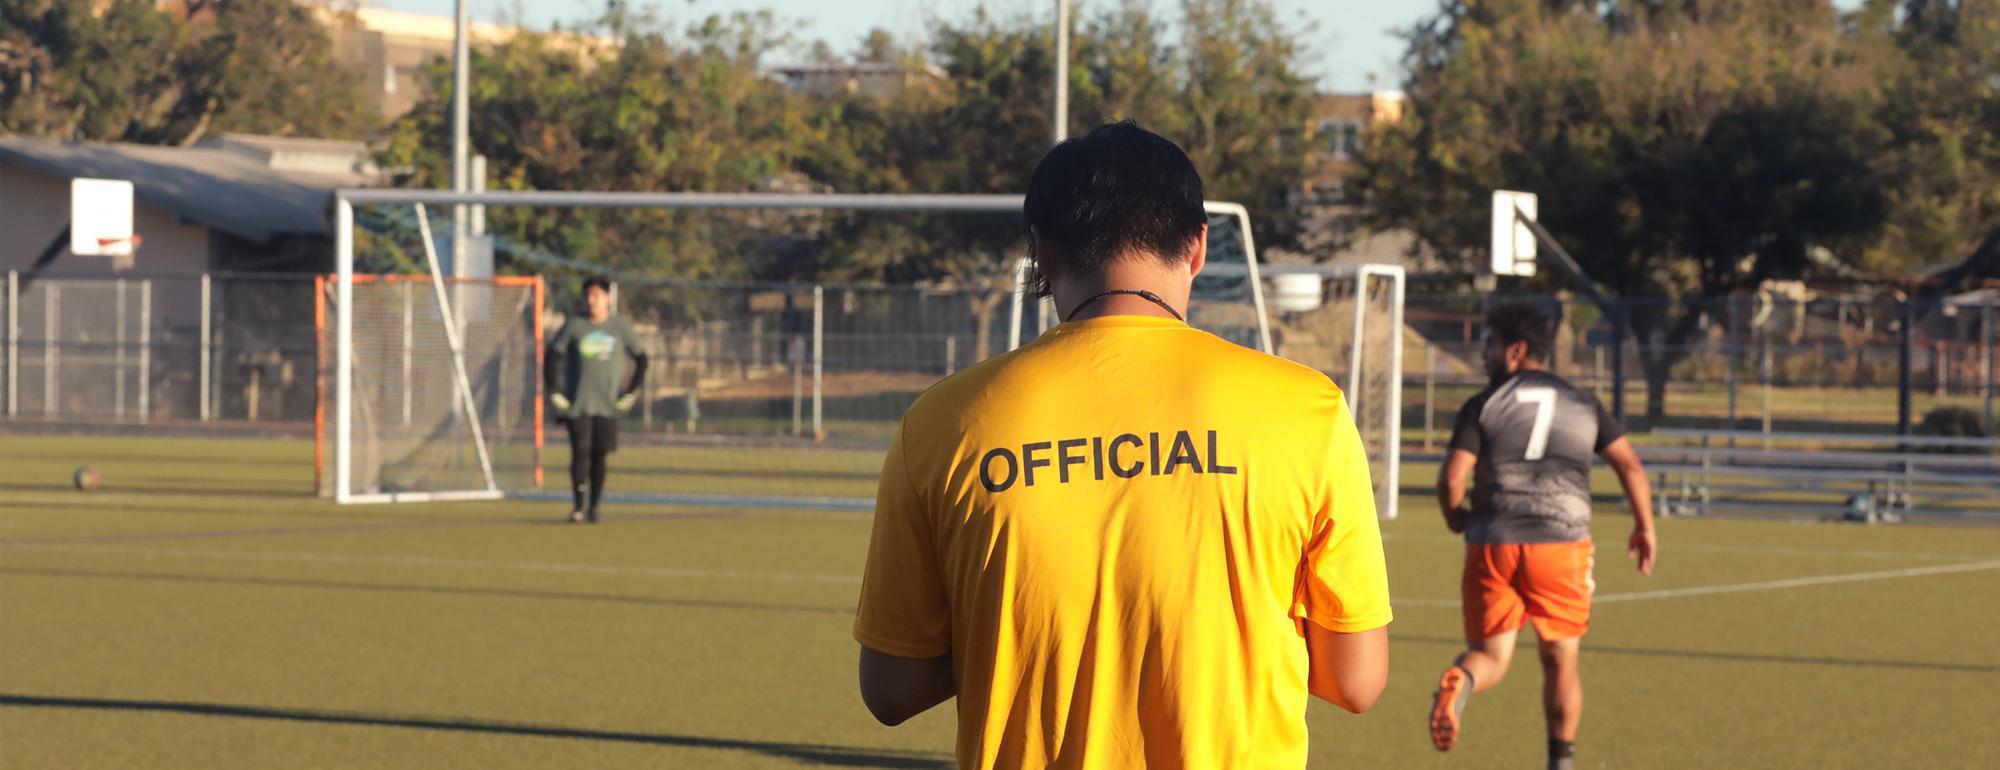 Official in yellow shirt stands with his back to camera on an outdoor soccer field